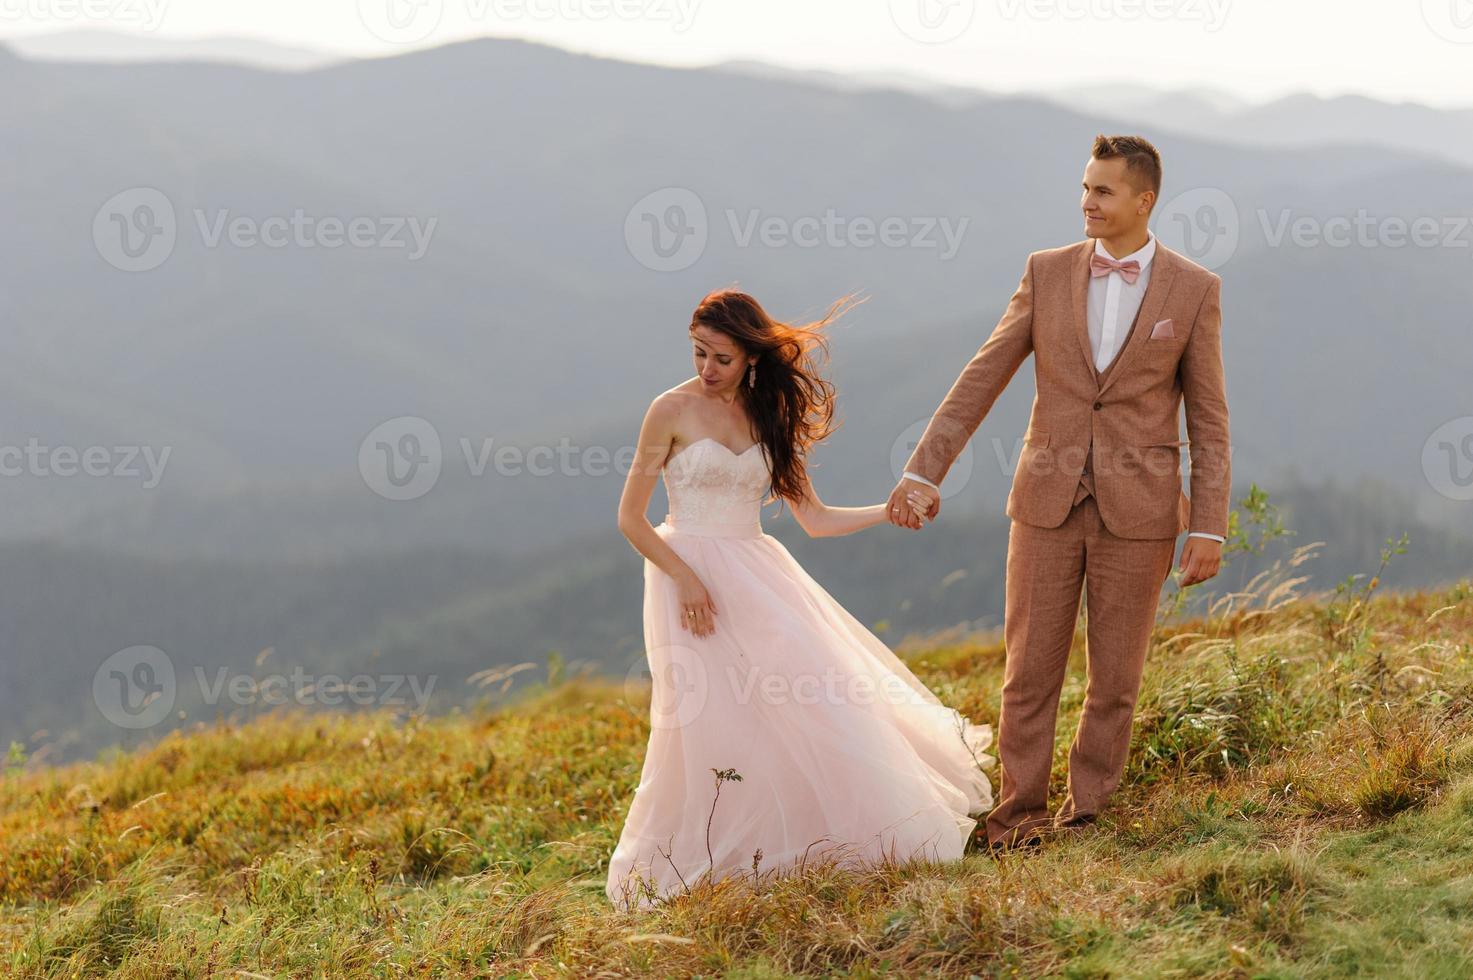 bride and groom. Photo shoot in the mountains.